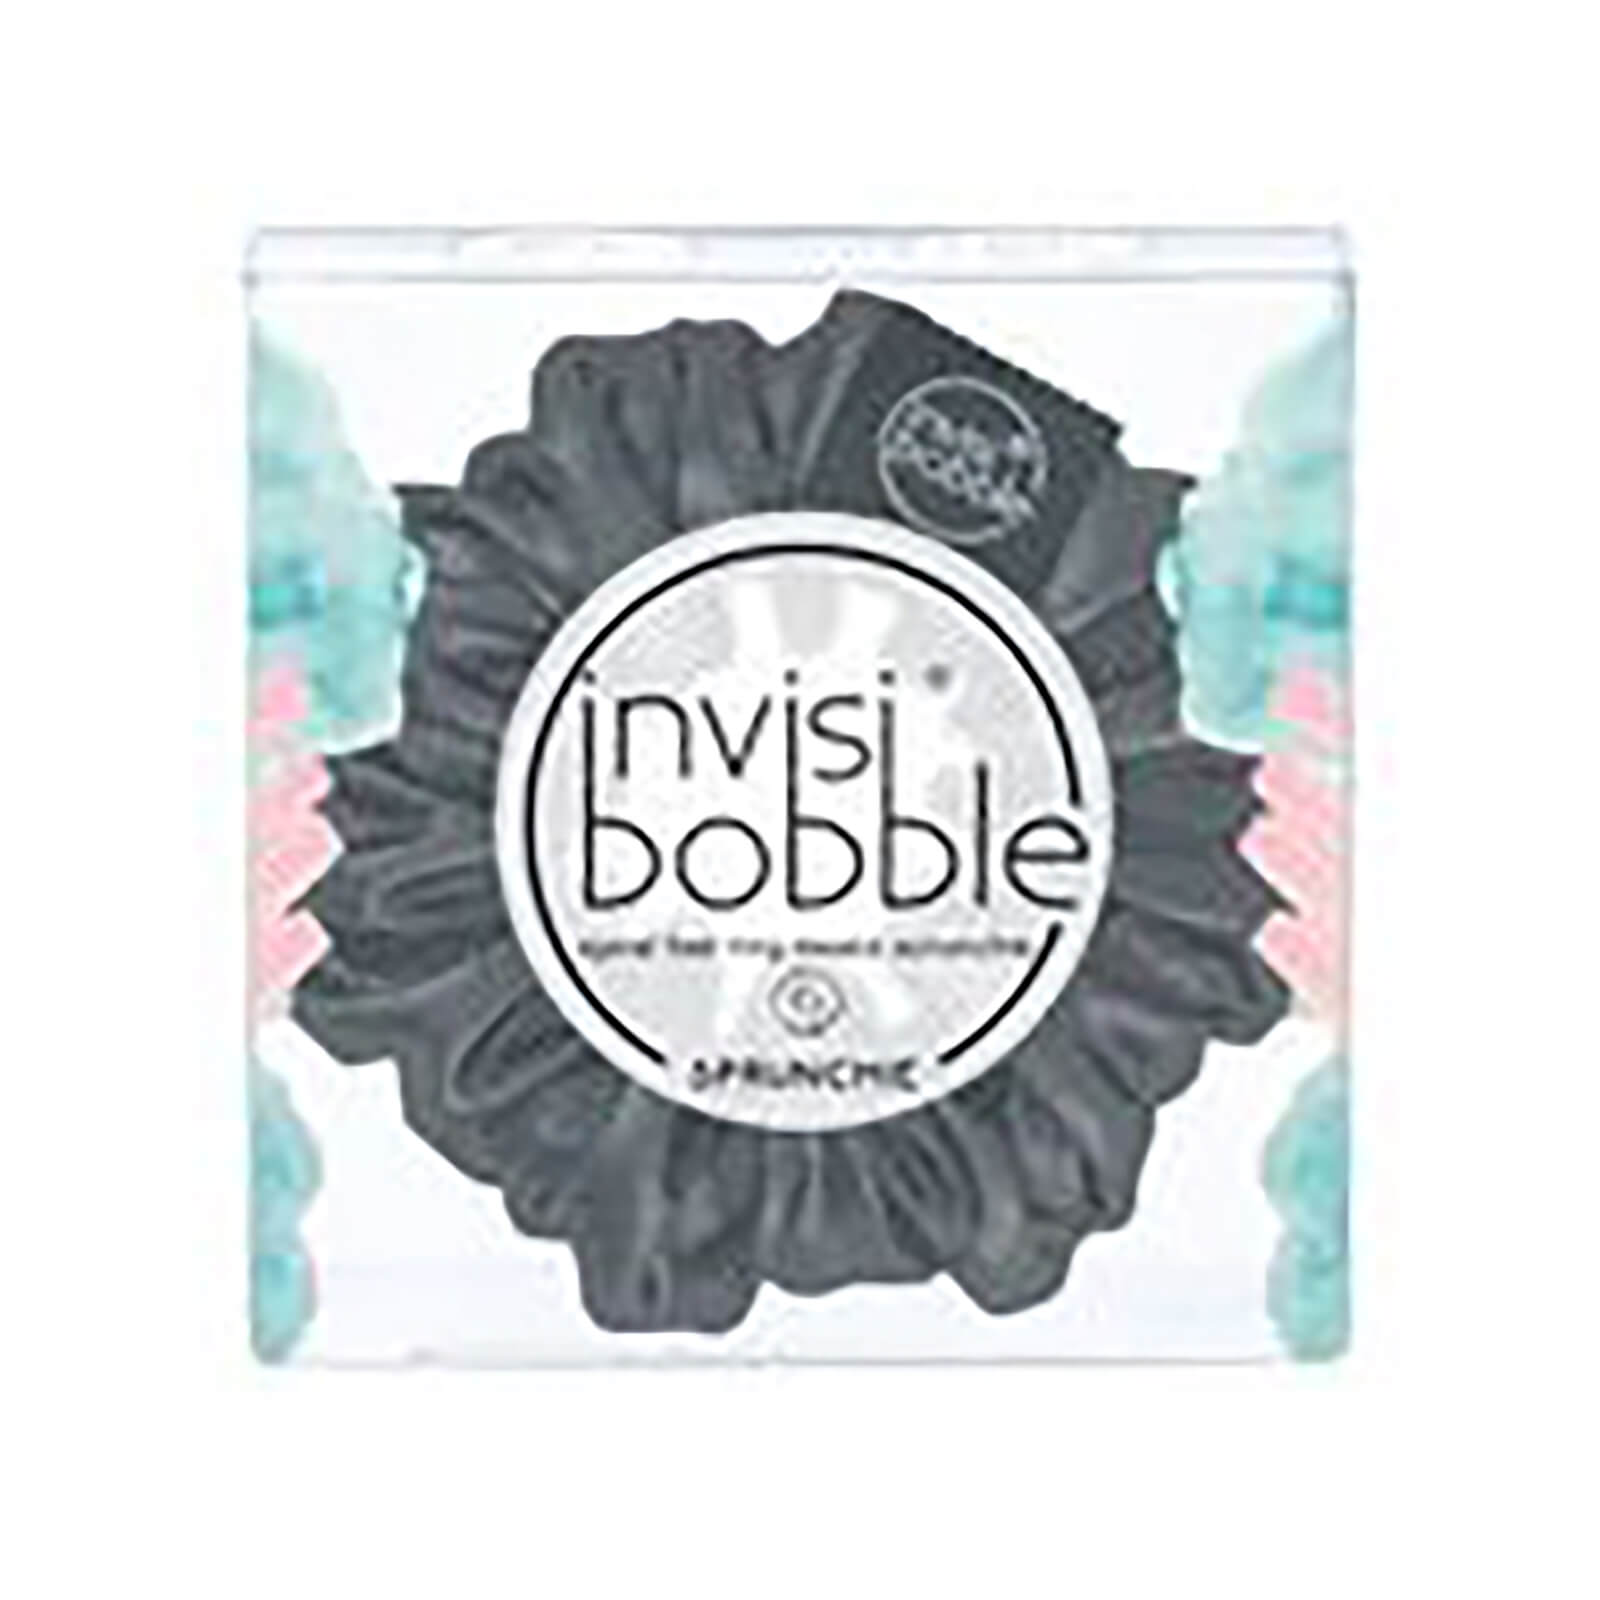 invisibobble Sprunchie Spiral Hair Ring Scrunchie - Holy Cow That's not Leather